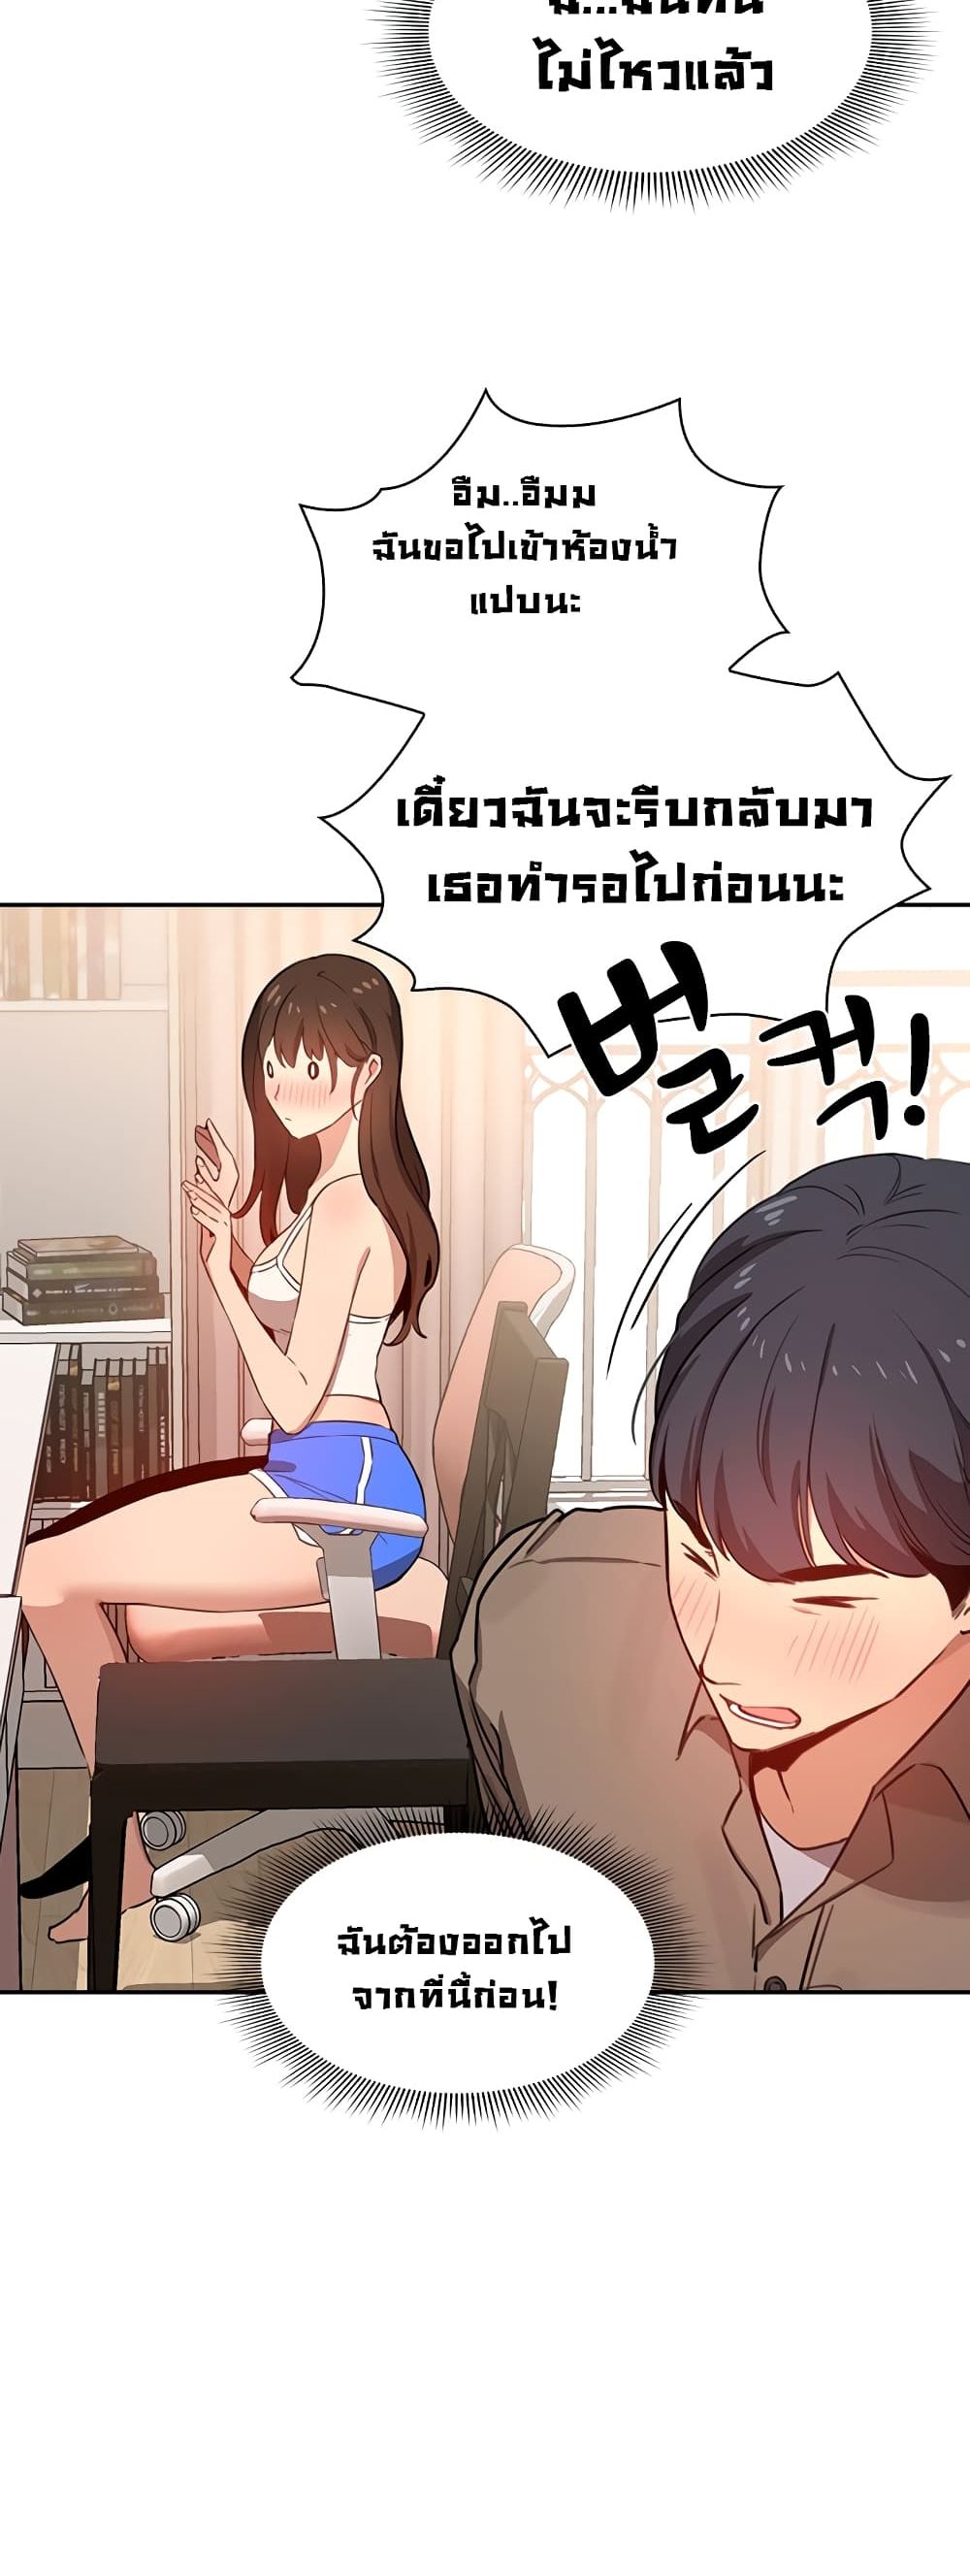 Private Tutoring in These Trying Times 2 ภาพที่ 7